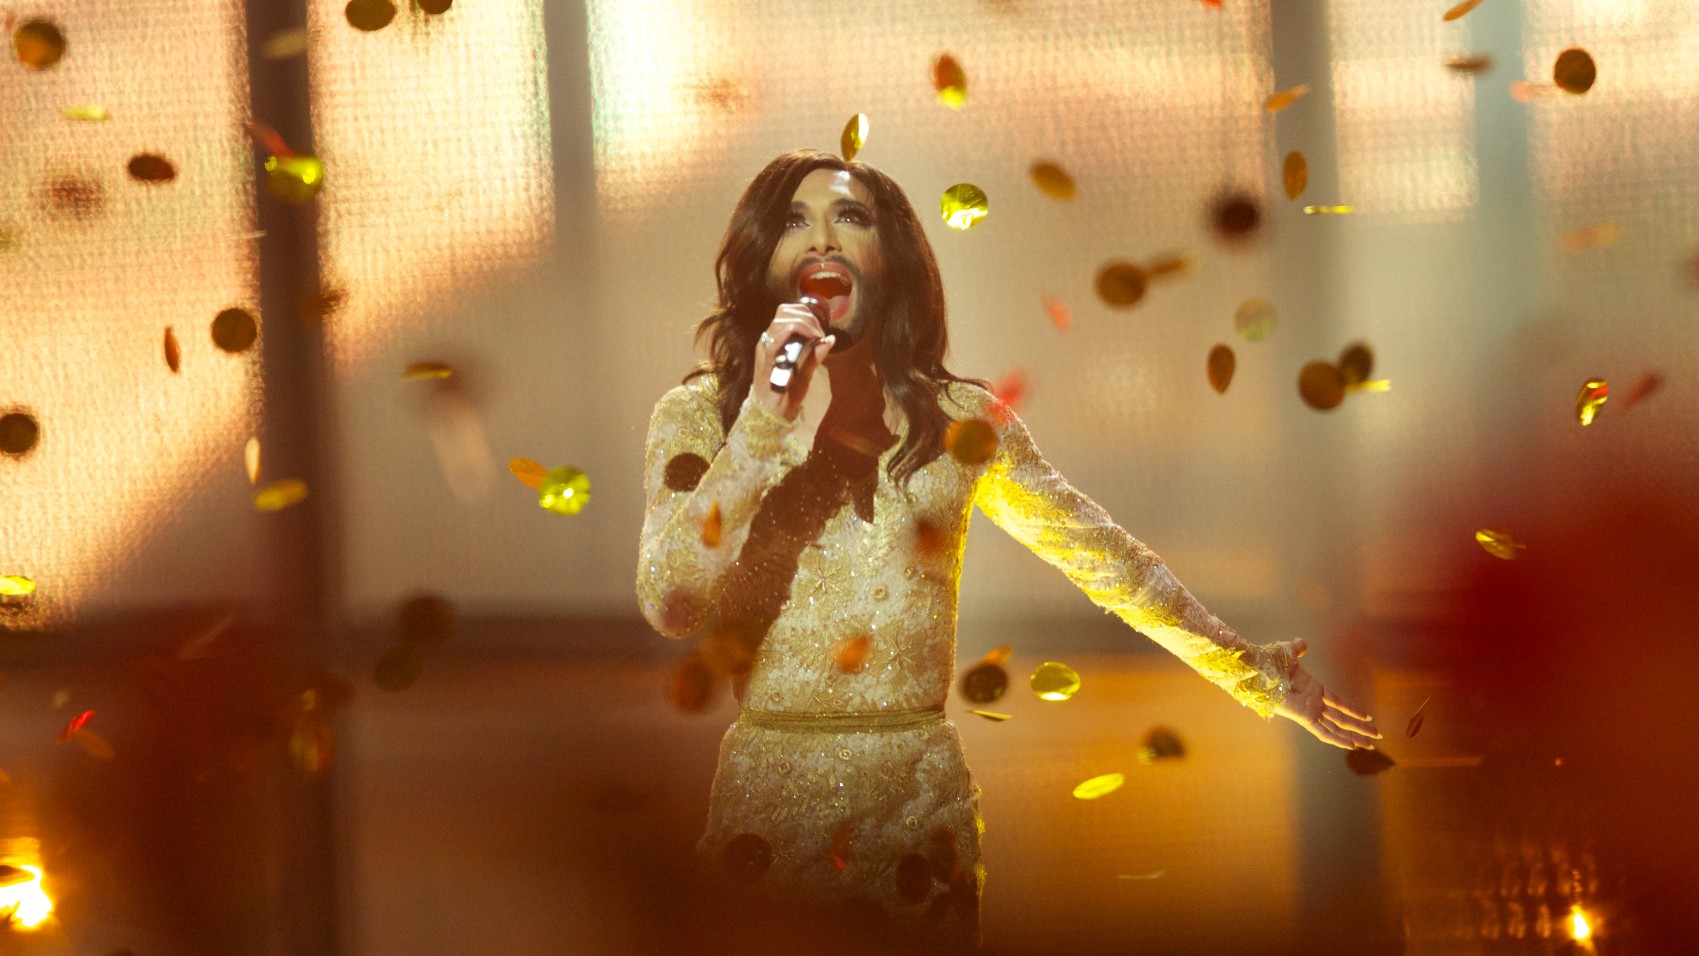 Austria’s Conchita Wurst performs on stage after winning the Eurovision Song Contest 2014 in Copenhagen, Denmark